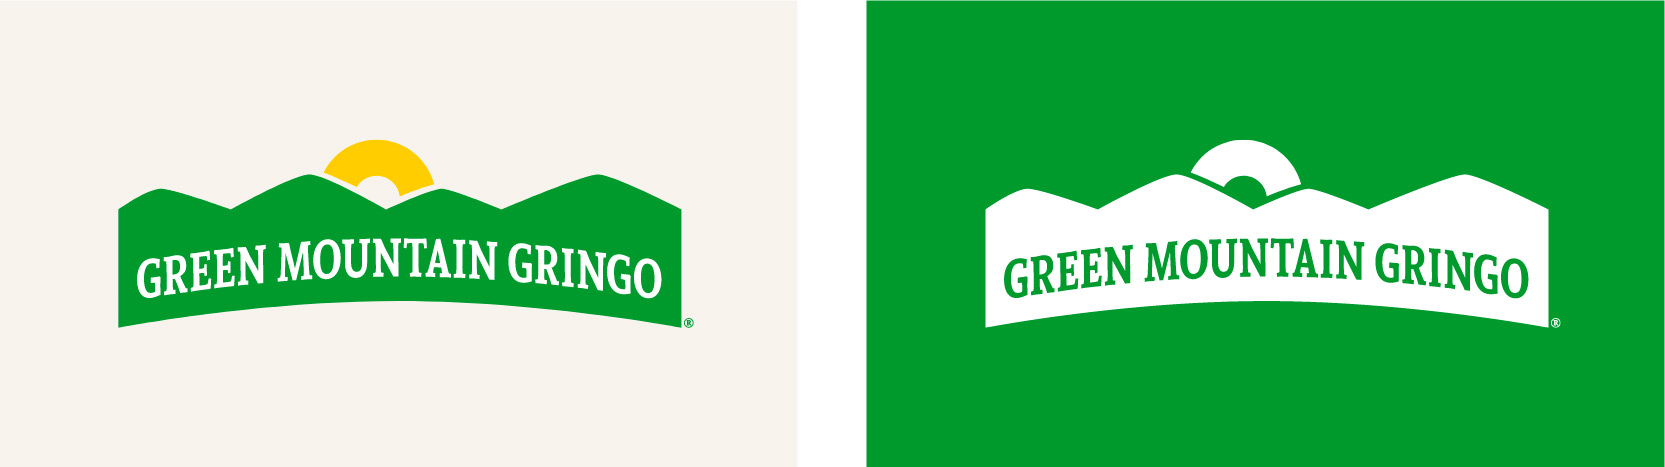 Green Mountain Gringo New Logo on Light Background and Reversed Out